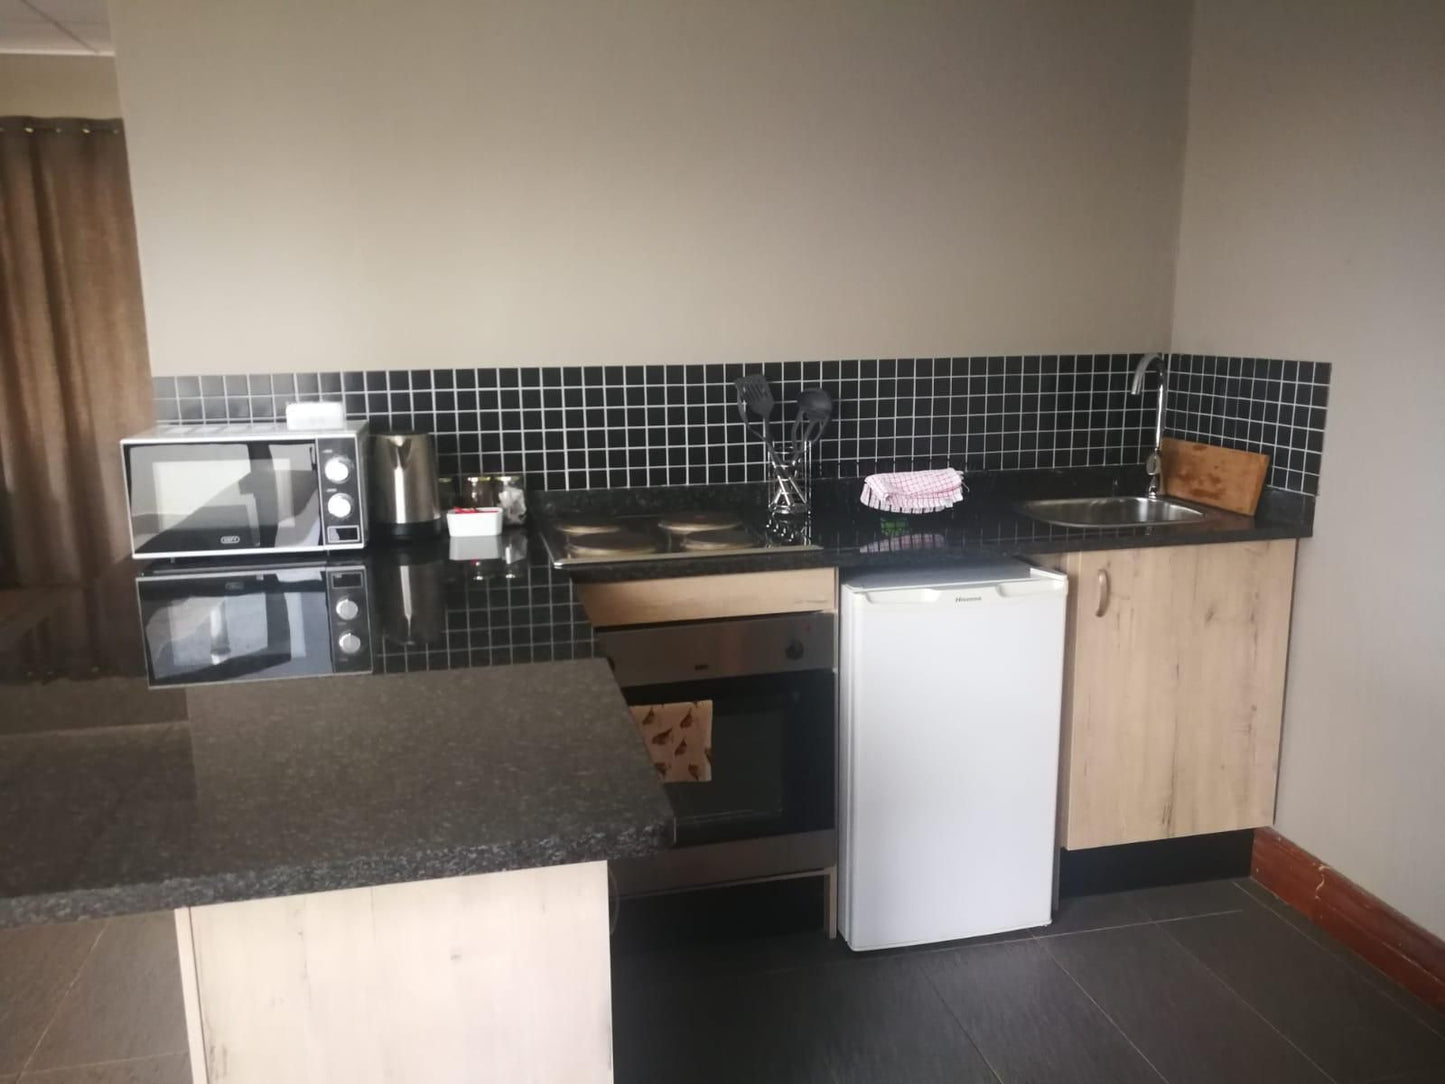 Stay 67 Apartments Dullstroom Dullstroom Mpumalanga South Africa Kitchen